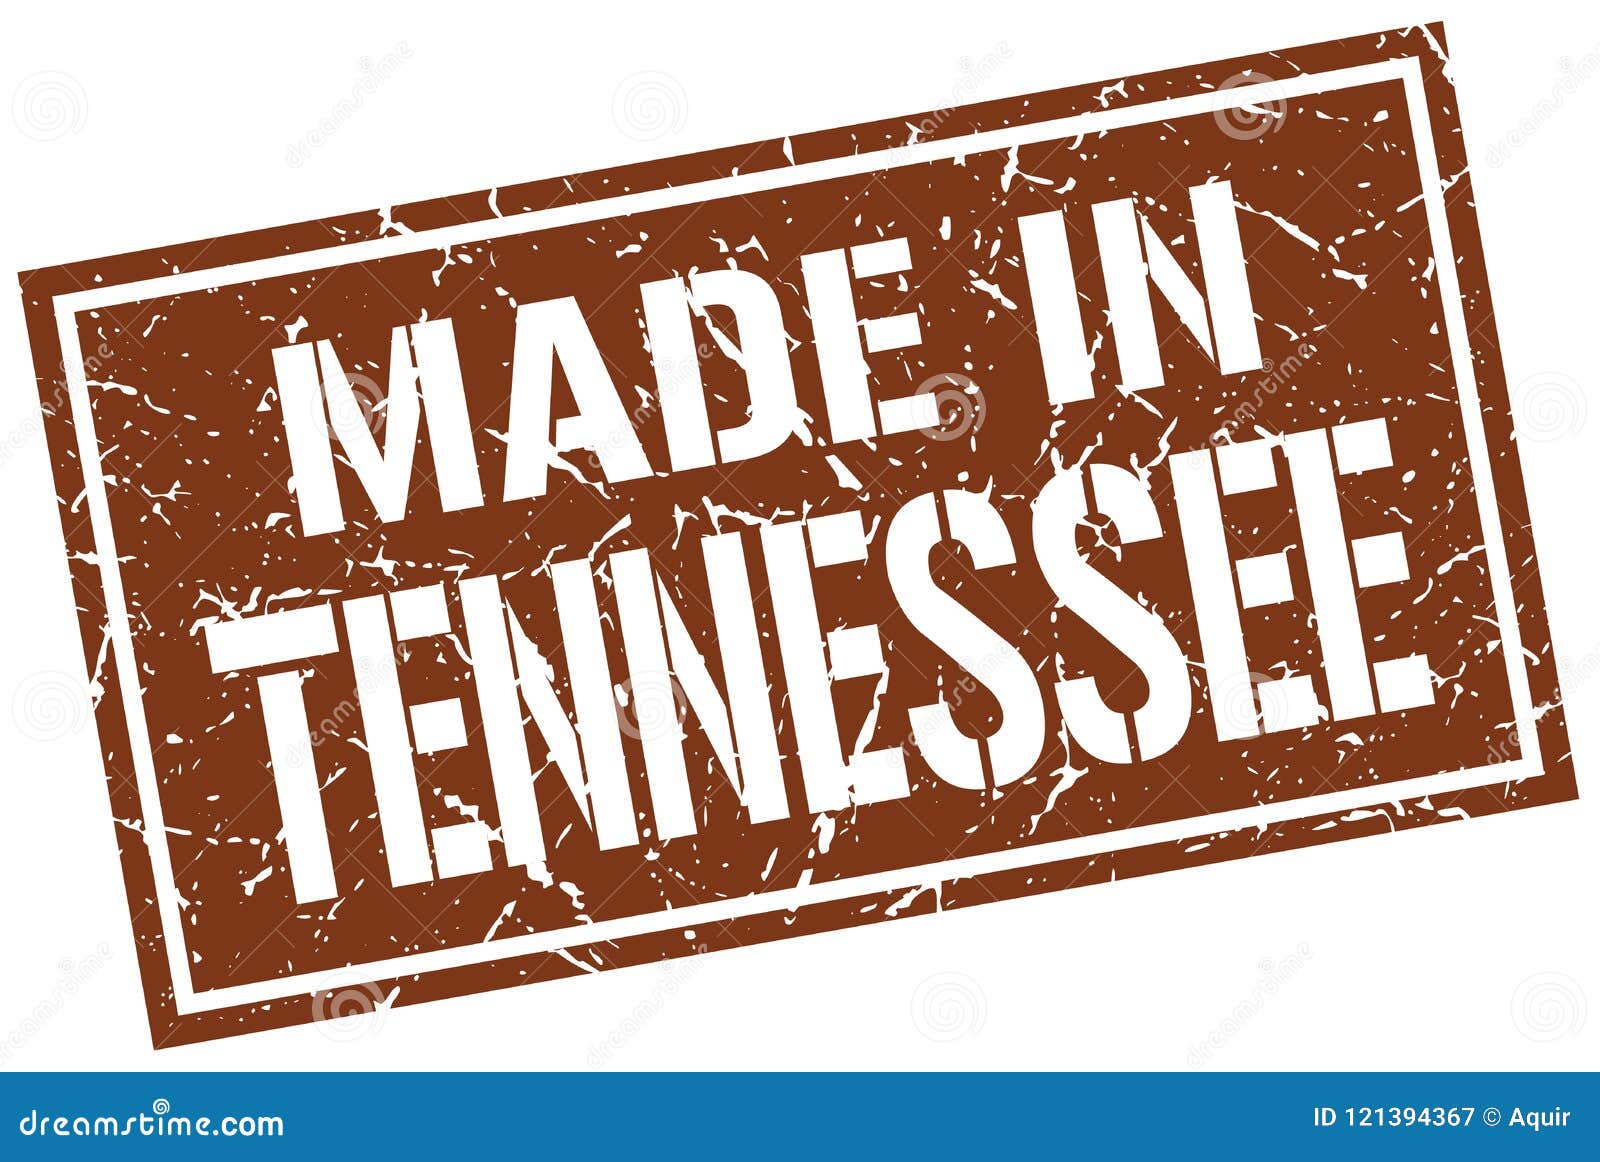 made in tennessee